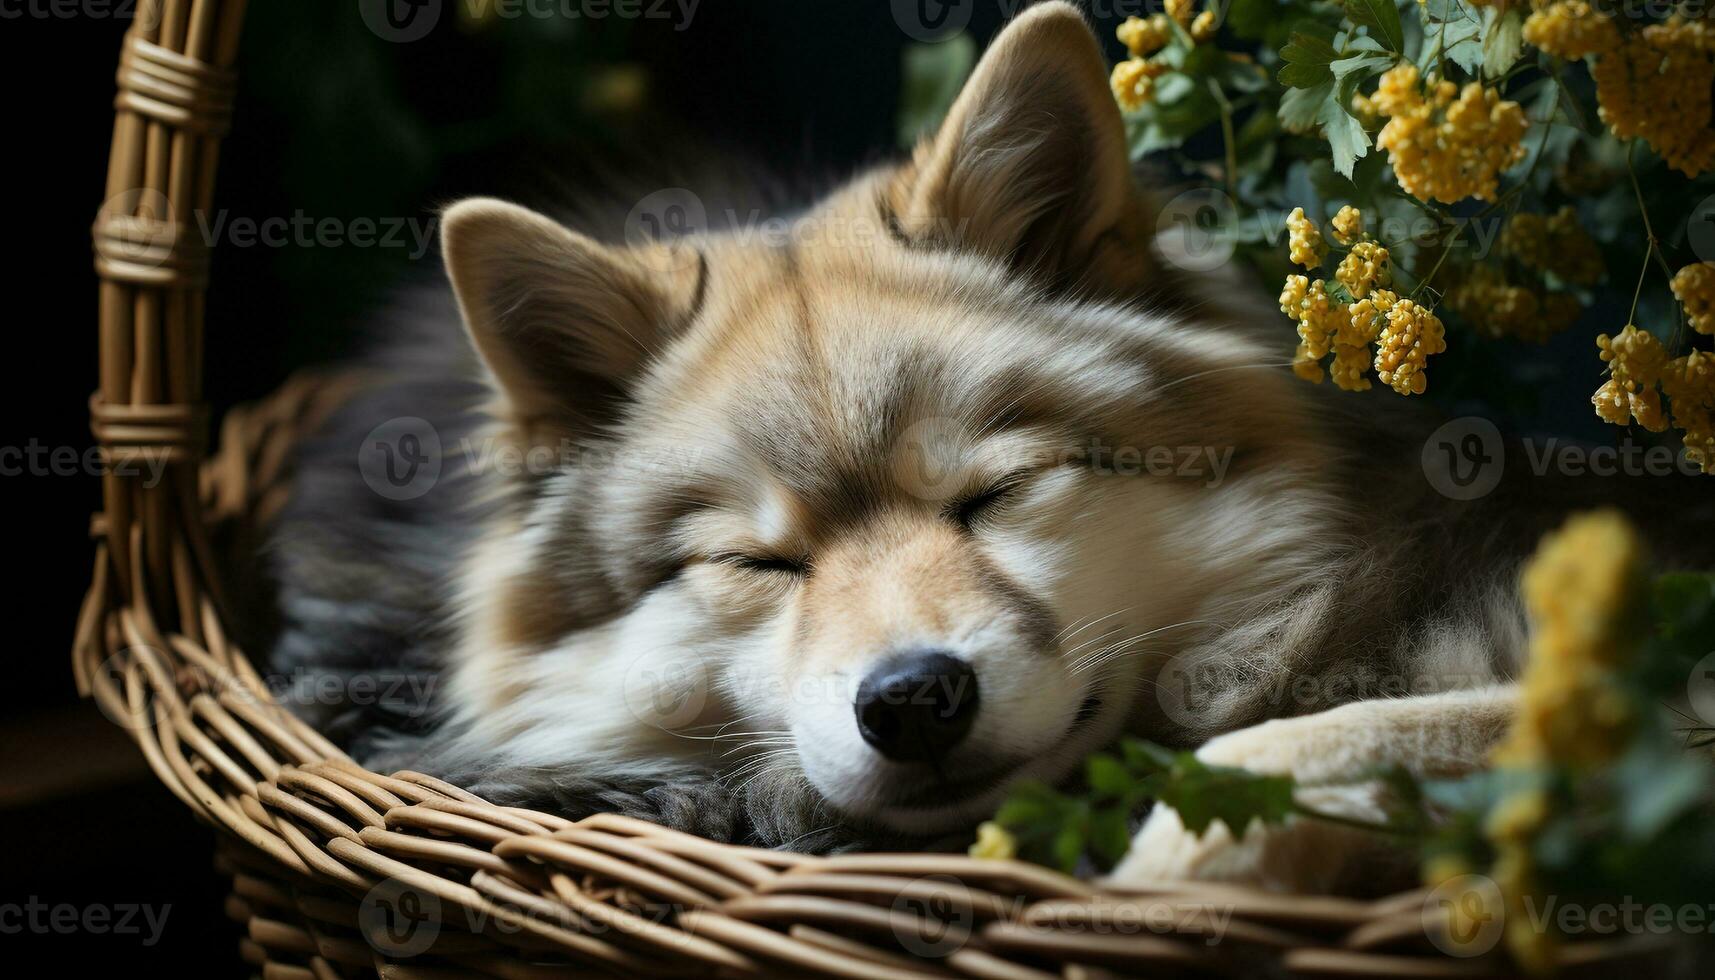 Cute small puppy sleeping in a basket, surrounded by nature generated by AI photo